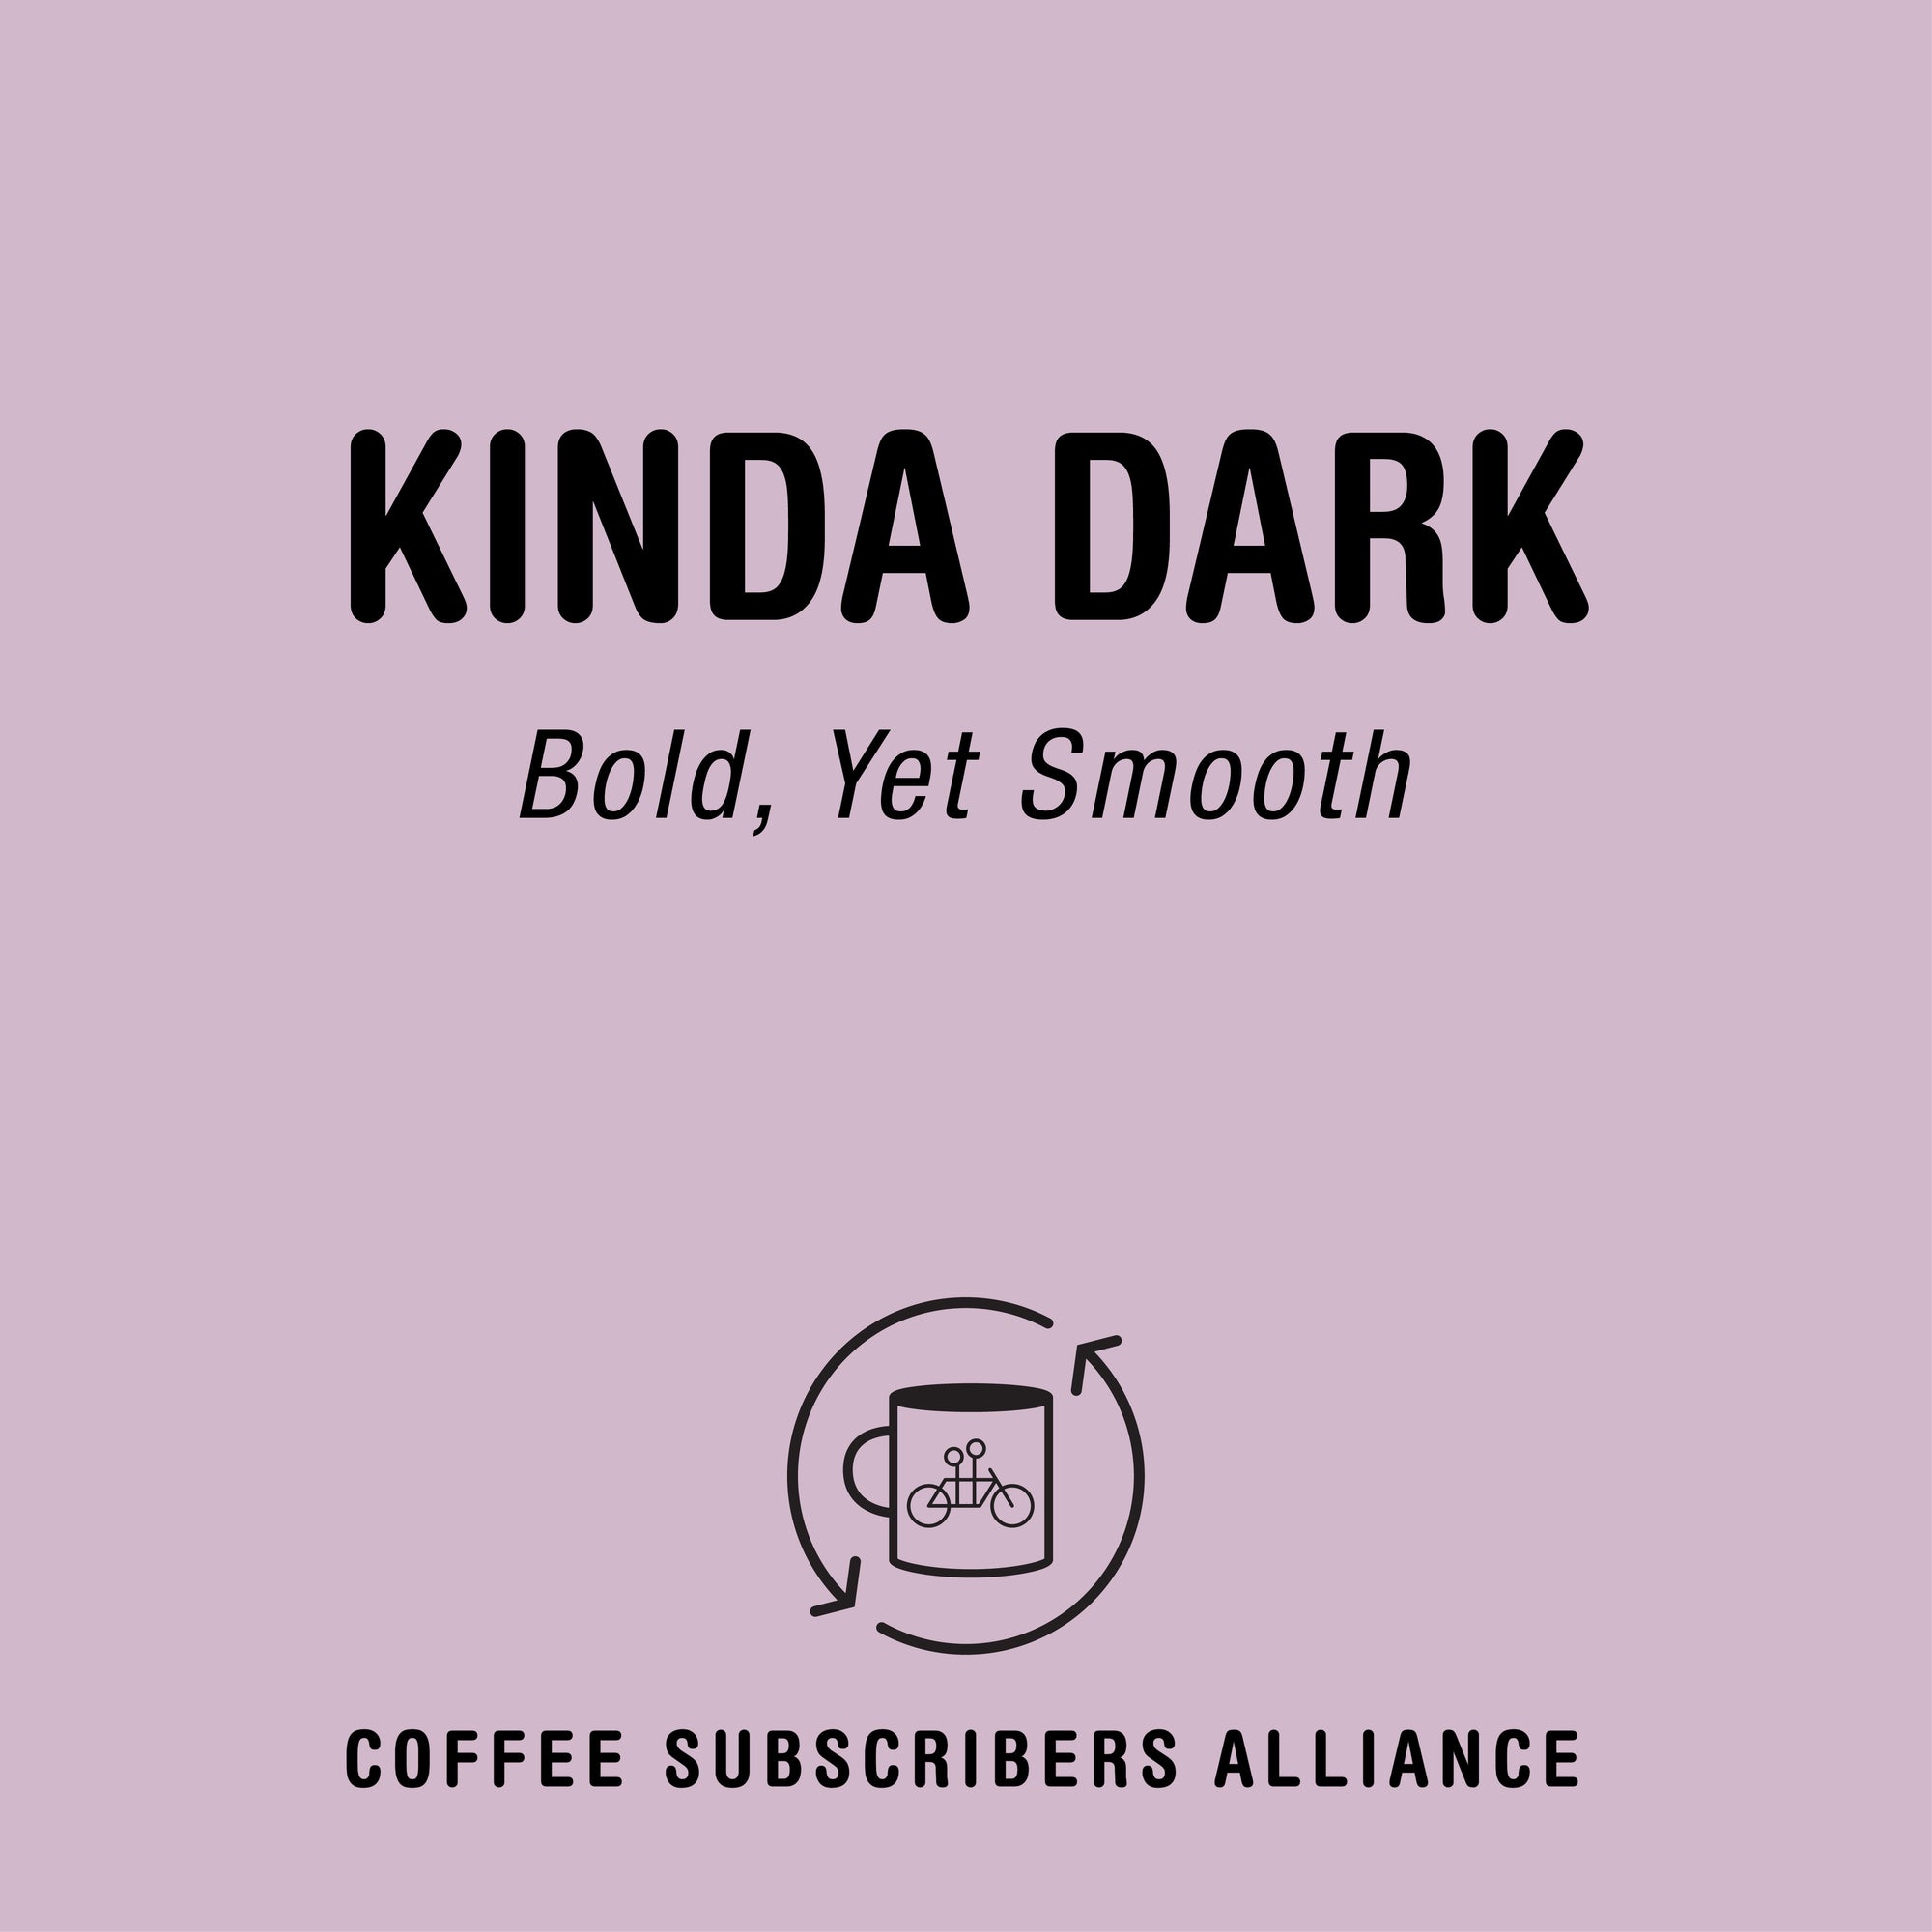 A graphic featuring text that says "kinda dark bold, yet smooth" with a logo of a cup with steam and coffee beans, labeled "Tandem Subscription Coffee Alliance," set against a muted pink background.